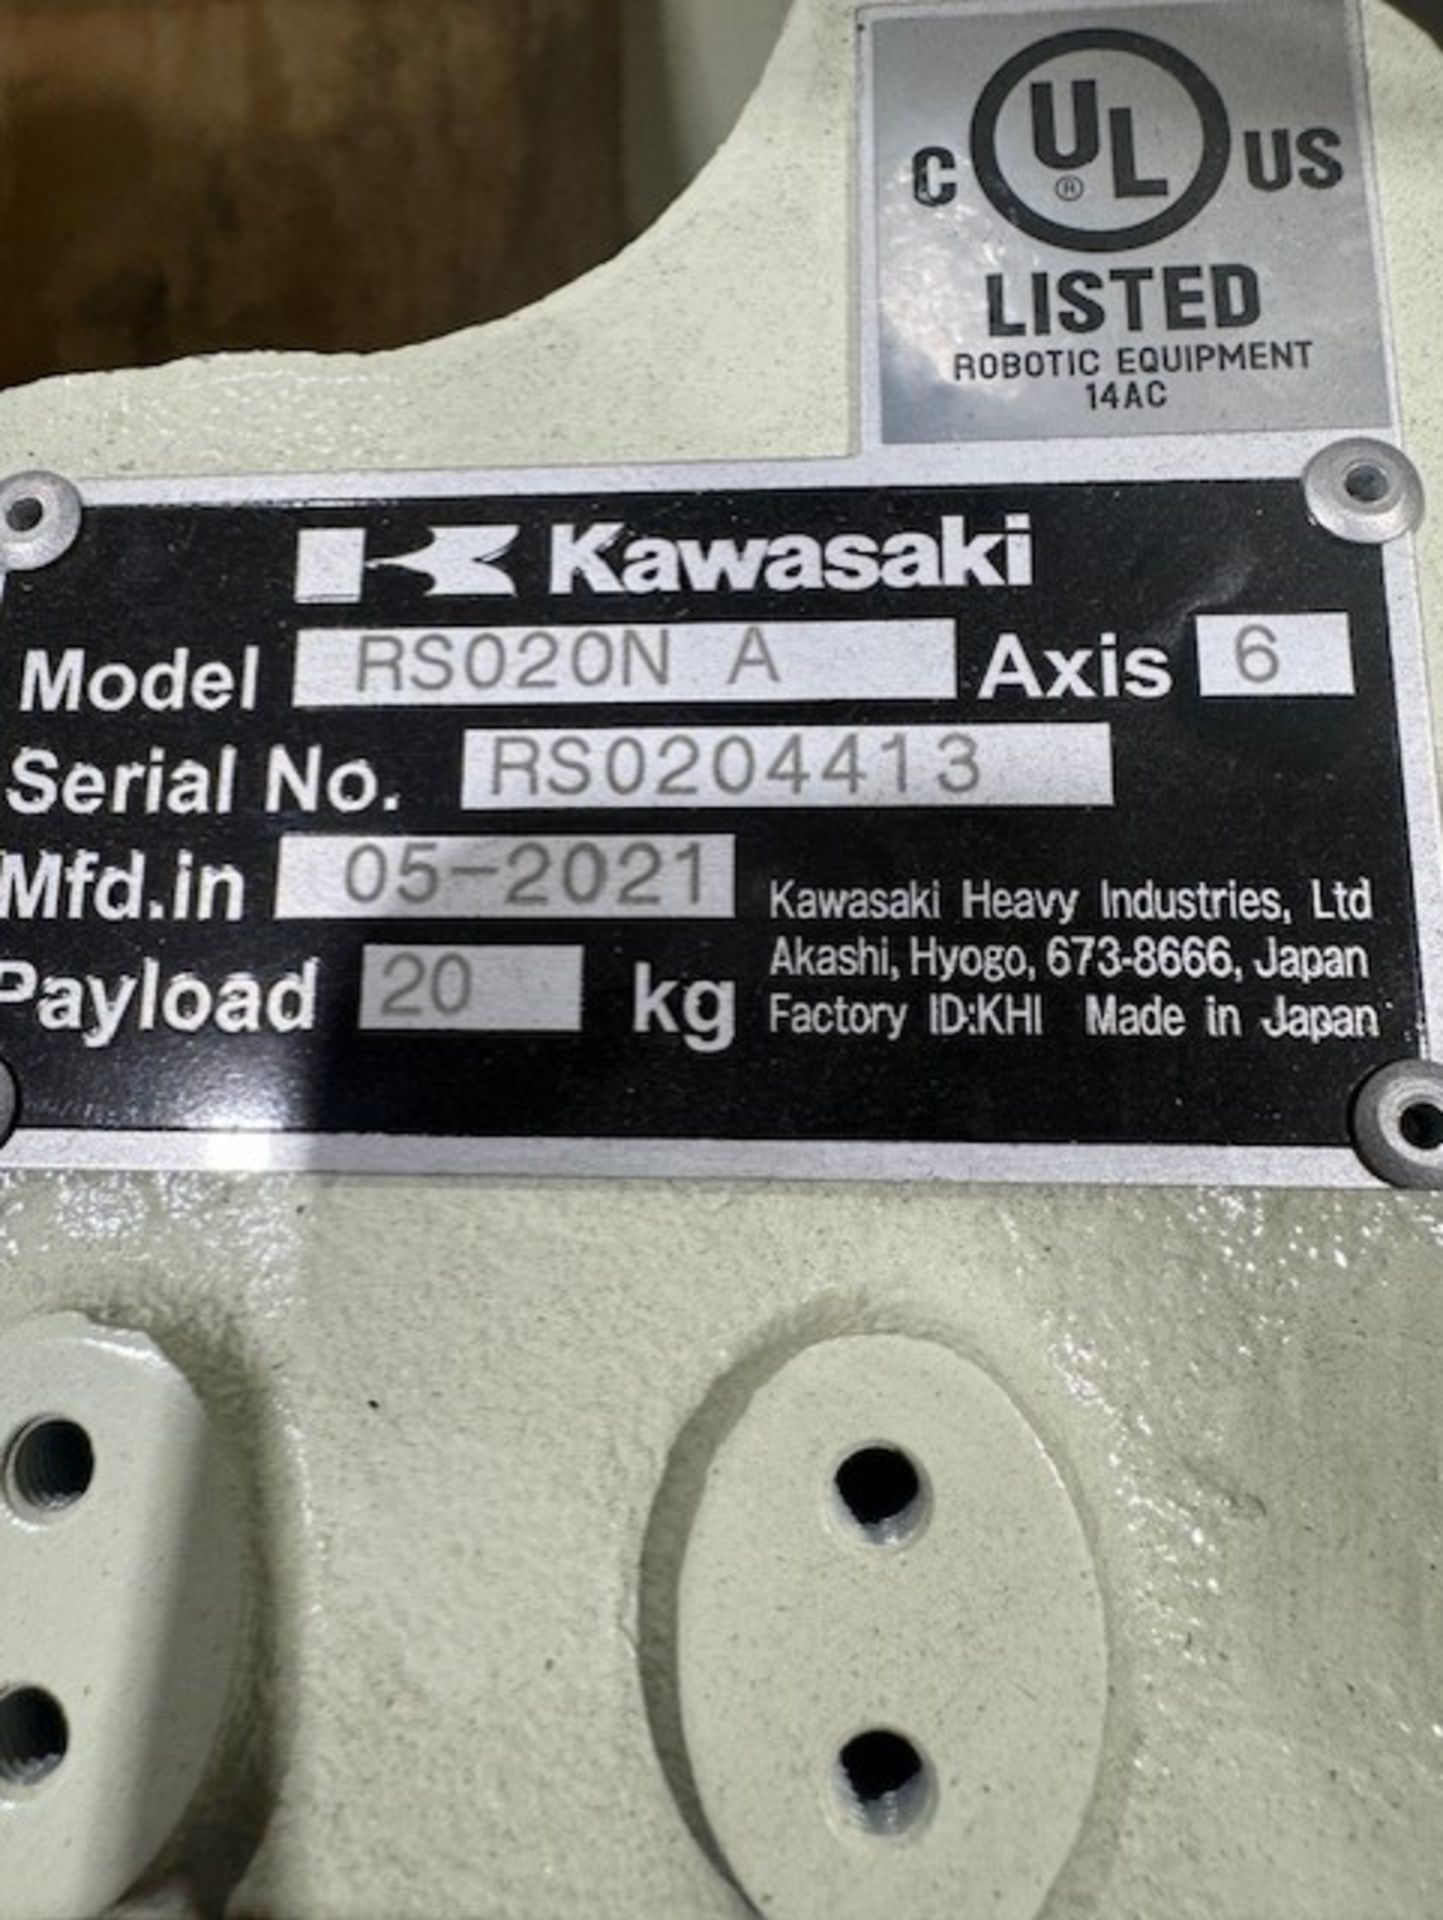 LIGHTLY USED KAWASAKI ROBOT RS020N, SN 4413 20KG X 1725MM REACH WITH EO1 CONTROLS, CABLES & TEACH - Image 6 of 7